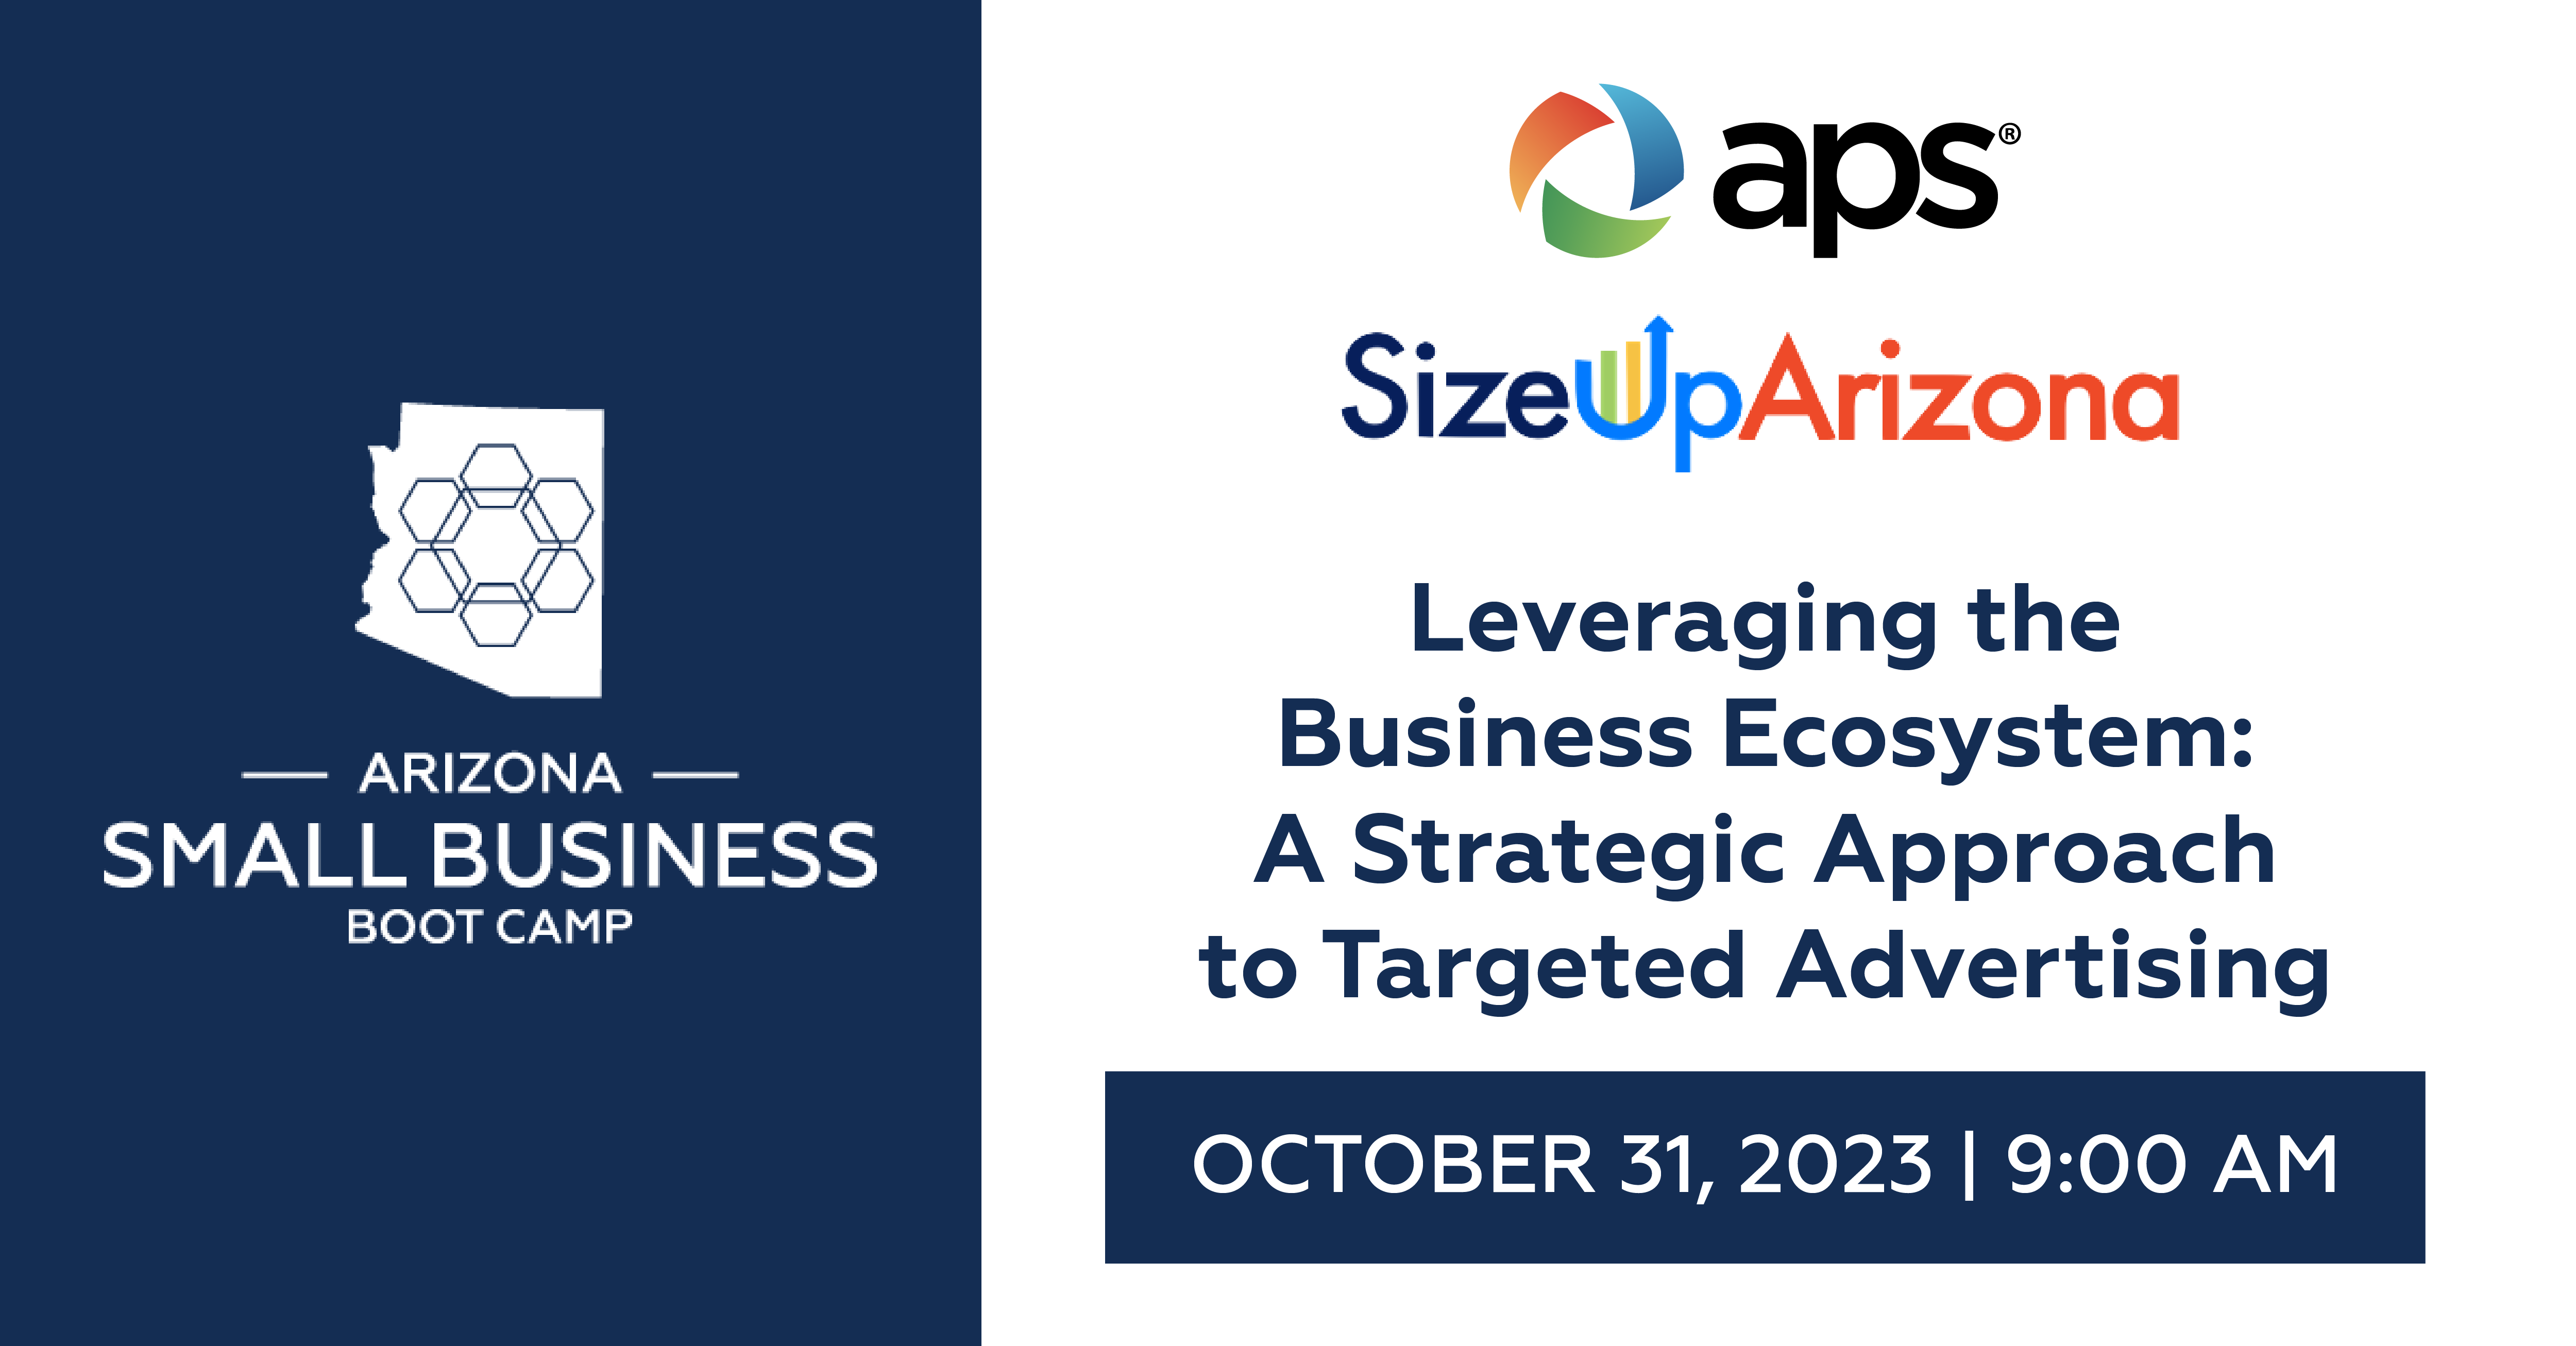 Leveraging the Business Ecosystem: A Strategic Approach to Targeted Advertising